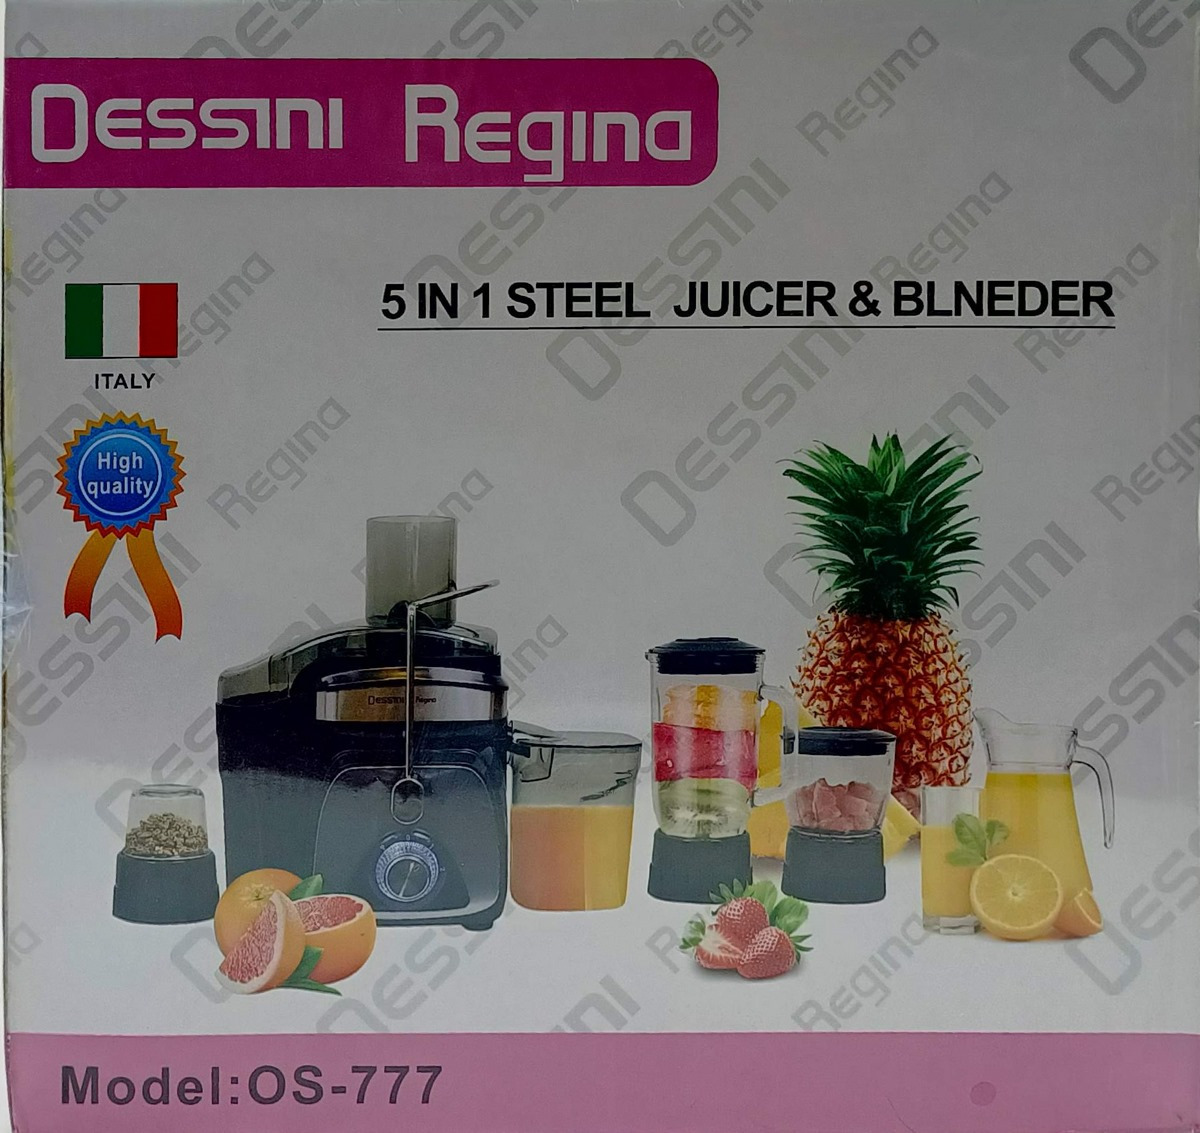 Dessini OLYMPIA KERIN  5 in 1 juicer and Blender - OS-777